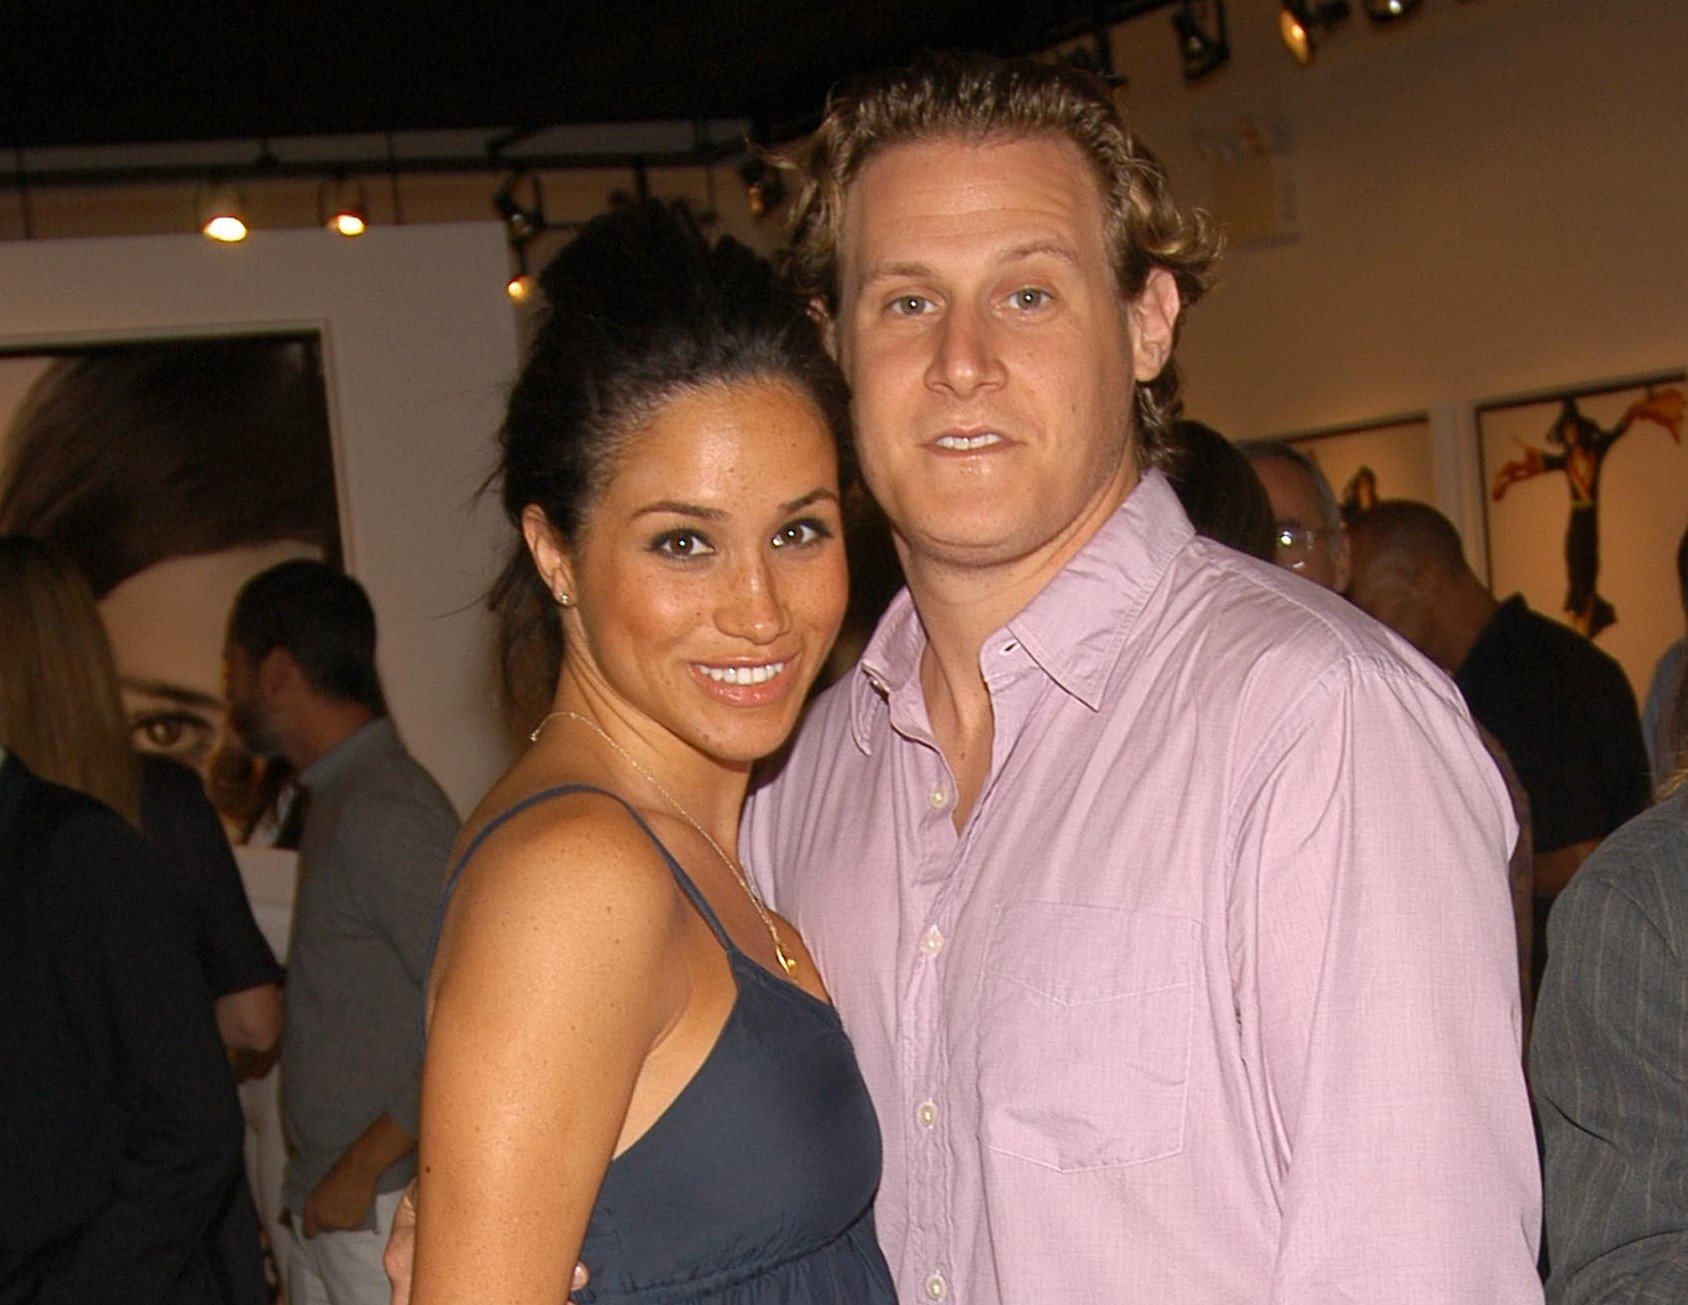 Meghan Markle posing with Trevor Engelson at a photo exhibit in 2006